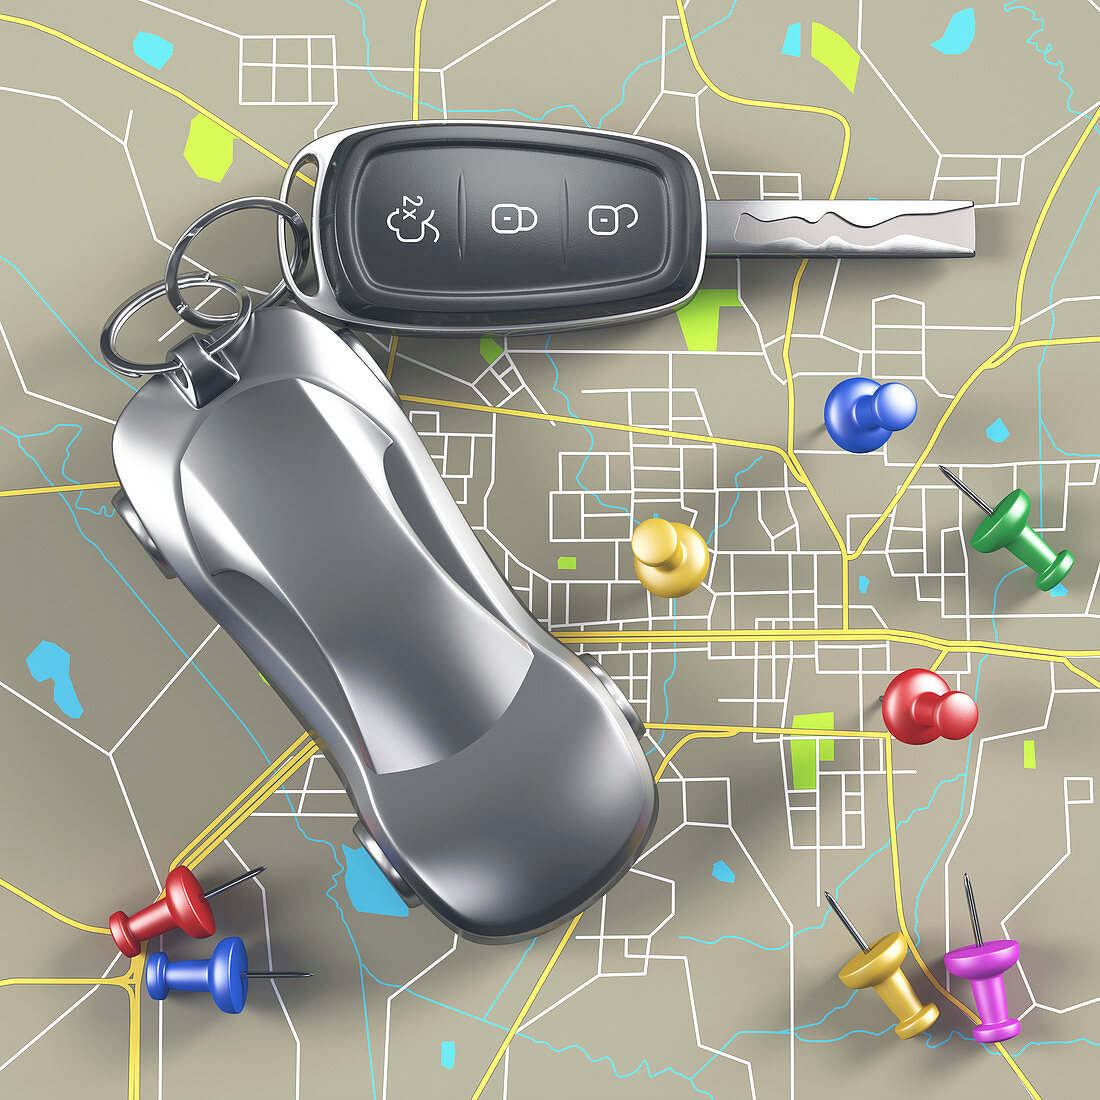 Car key and push pins in road map